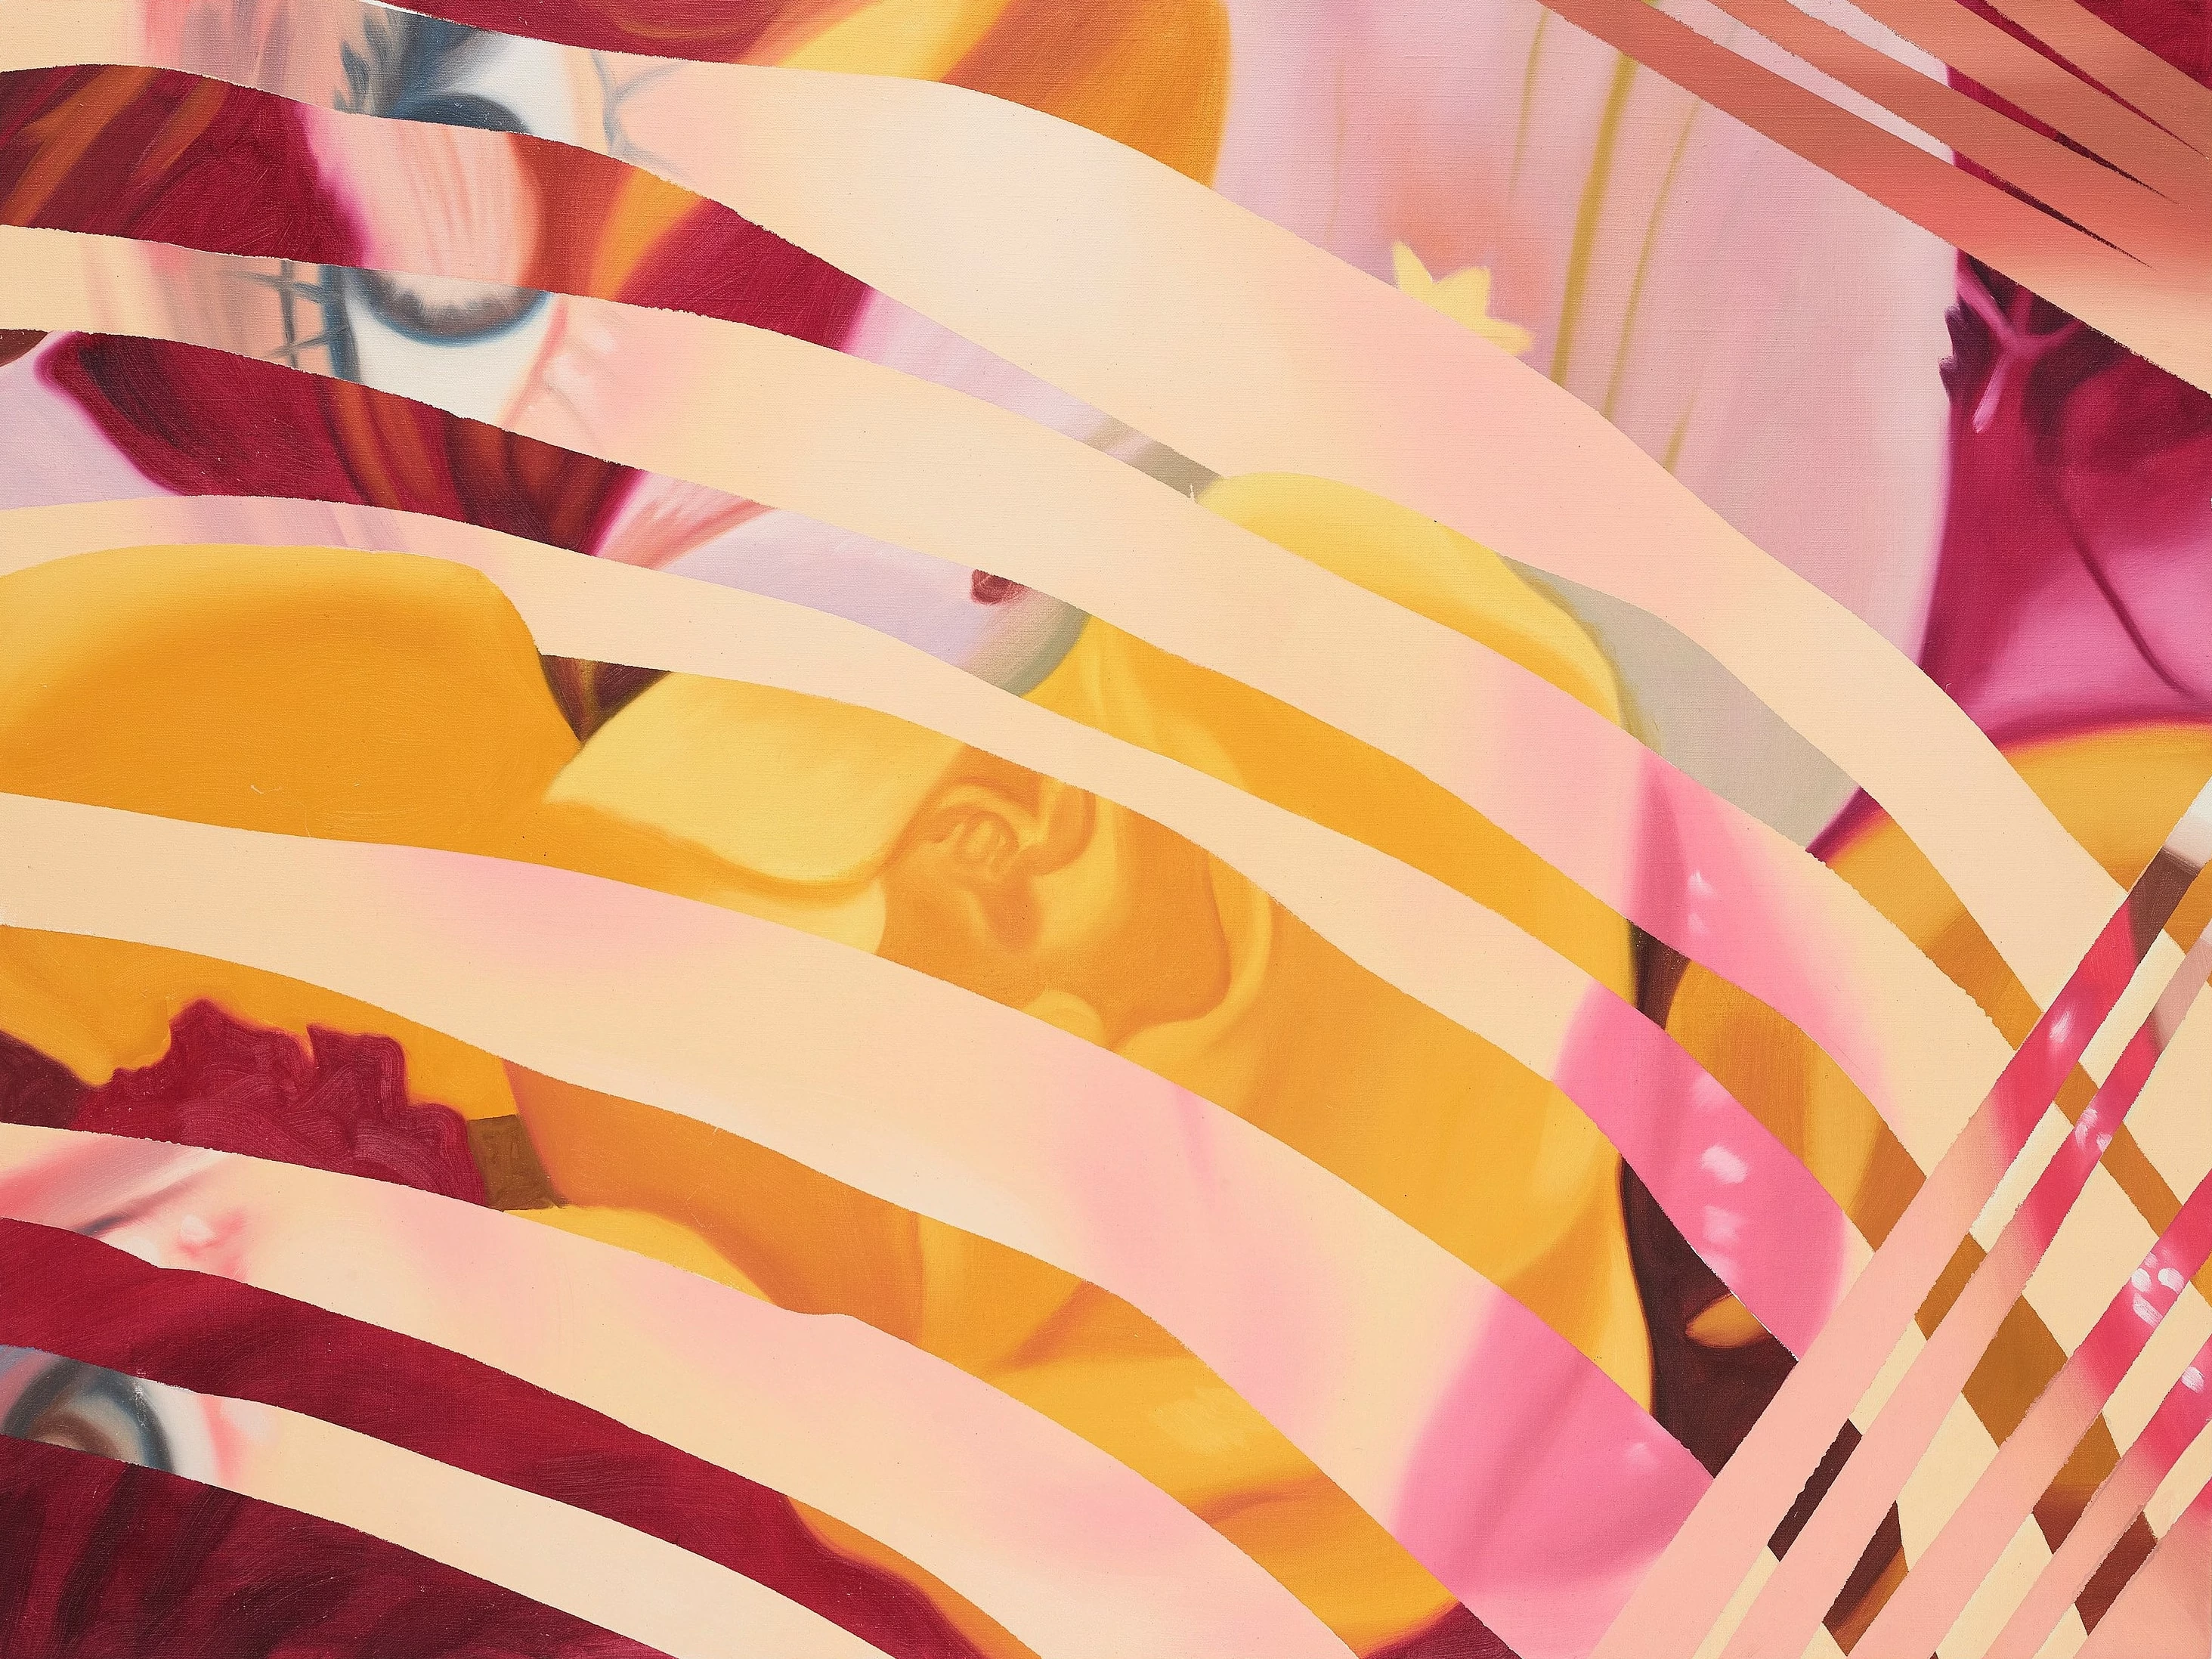 From Ladies of the Opera Terrace, James Rosenquist